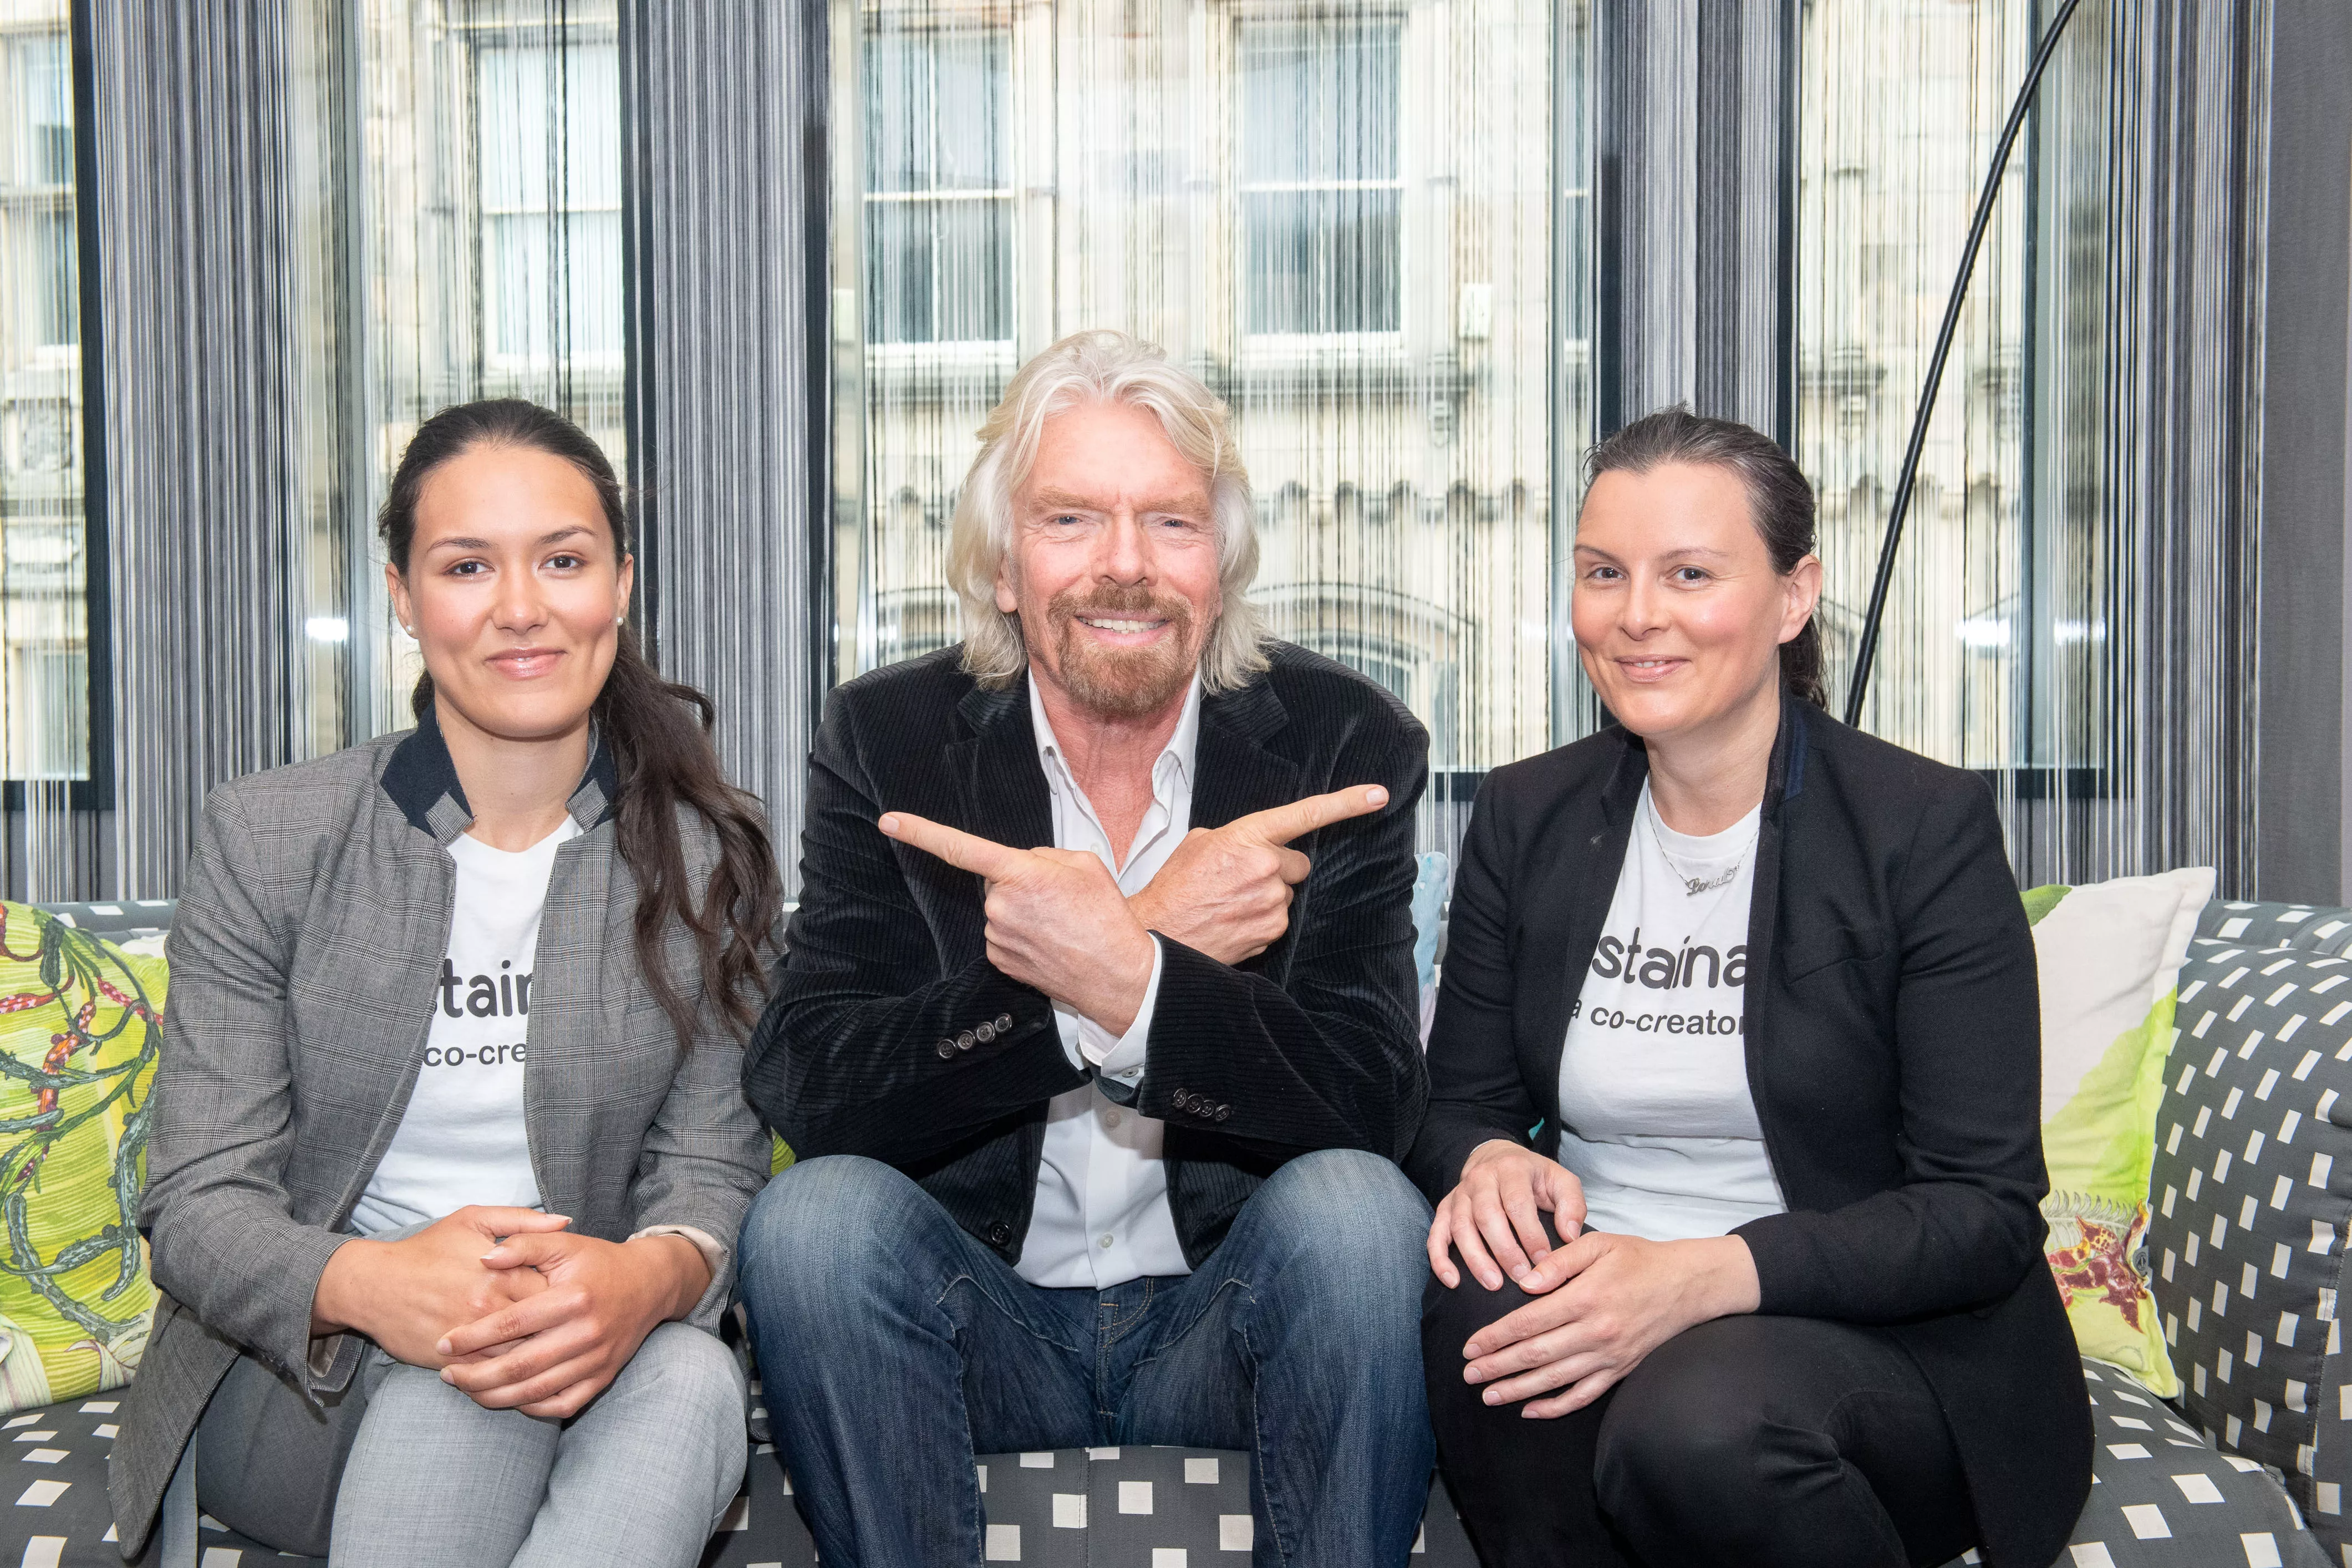 Eishel and Loral with Richard Branson. Photo: www.iangeorgesonphotography.co.uk